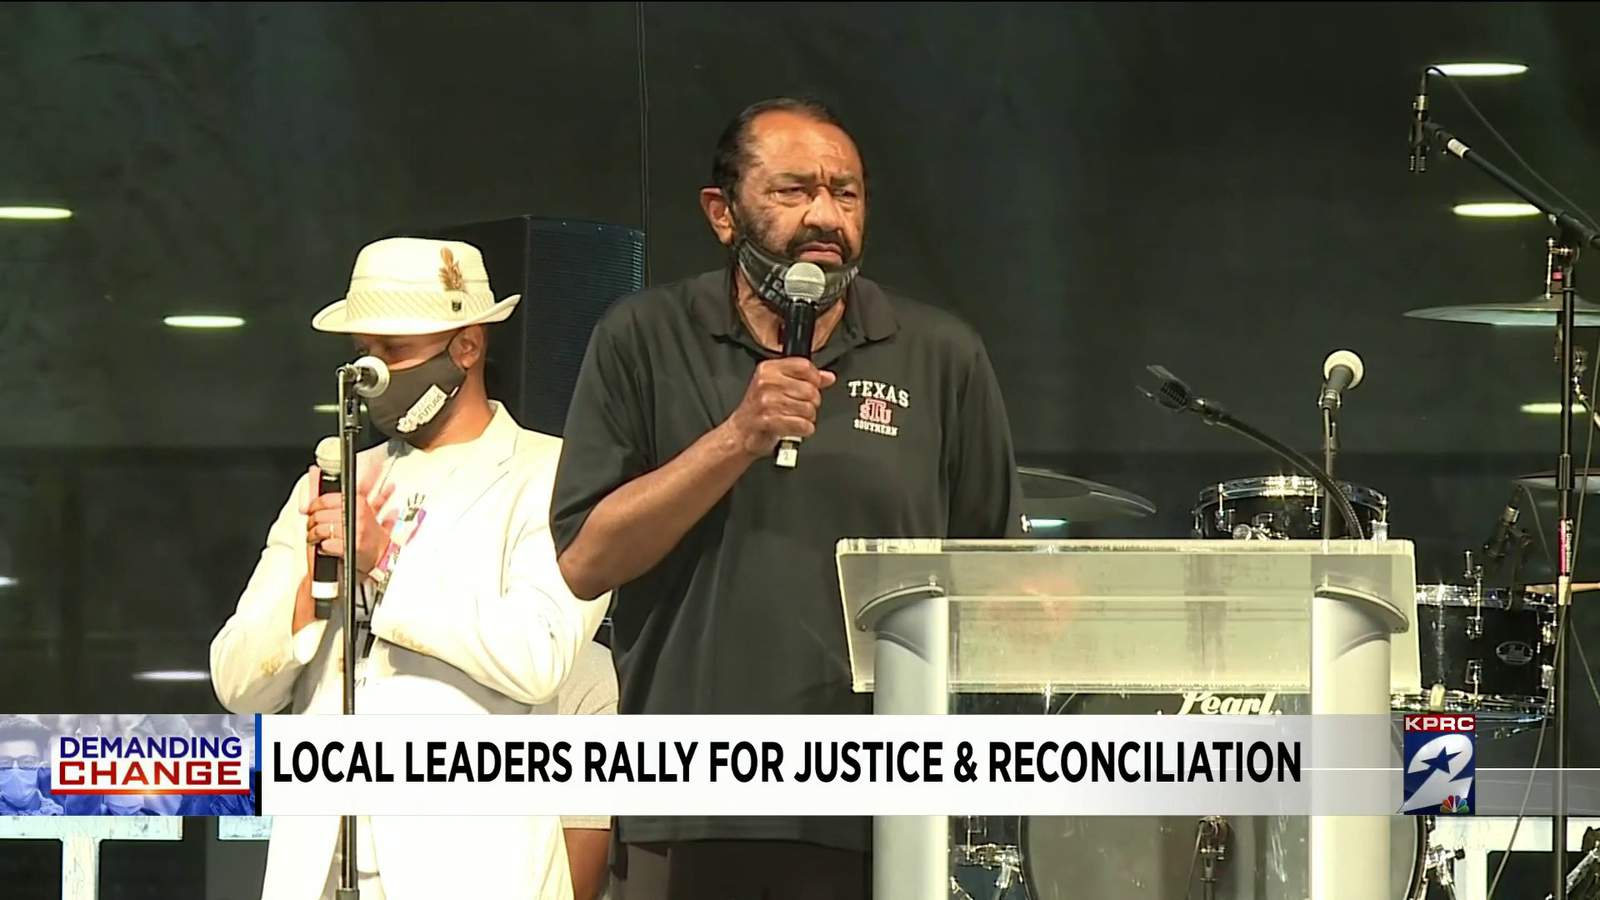 Local leaders rally for justice and reconciliation